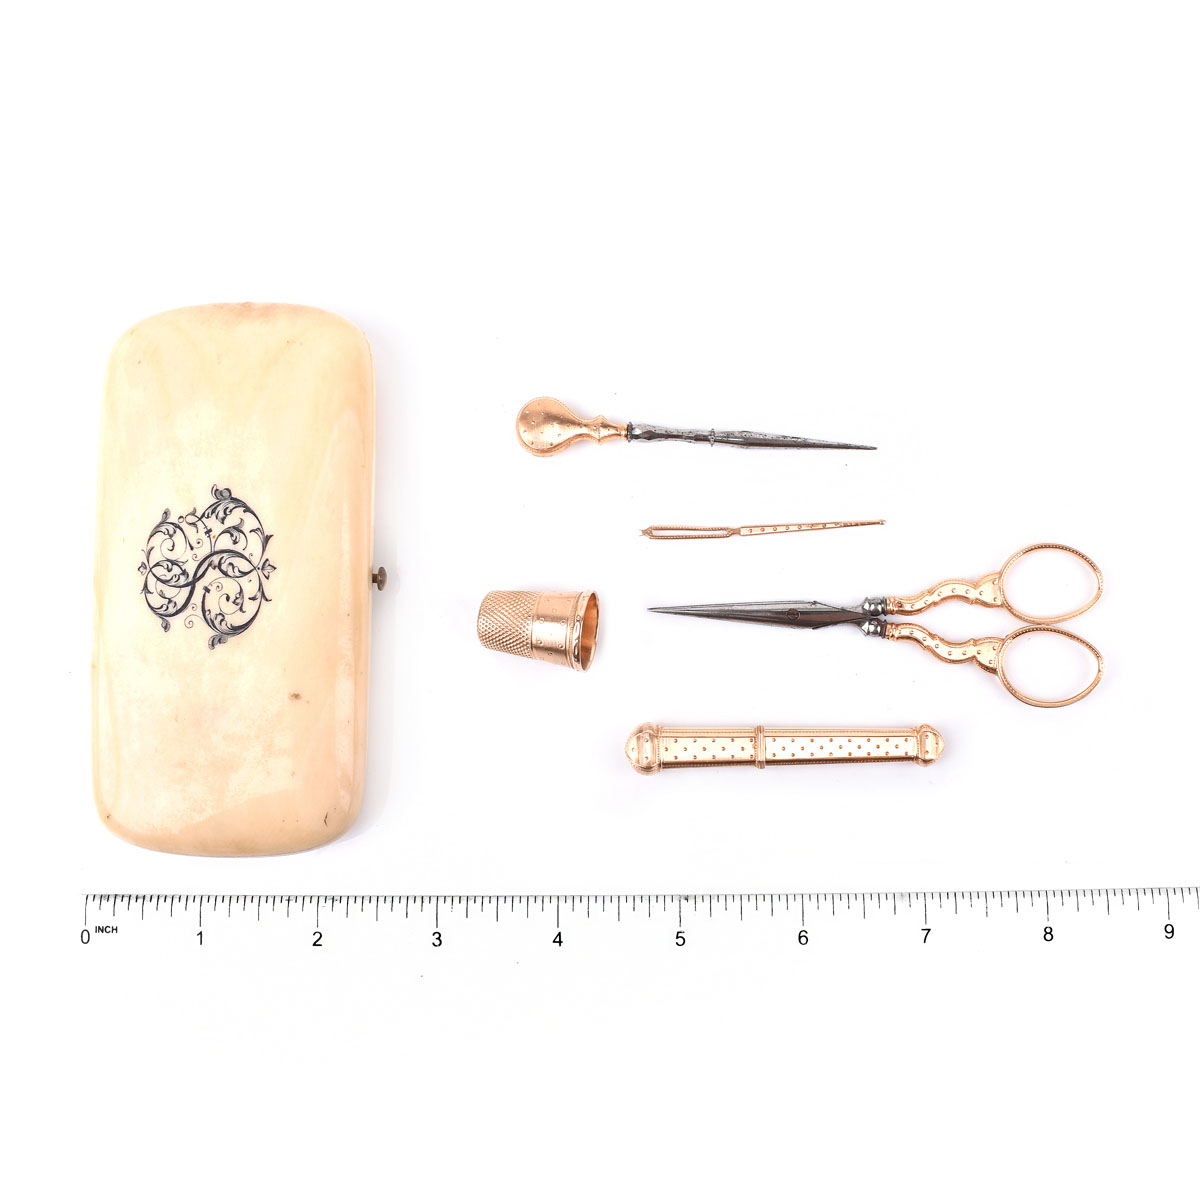 19th Century French 18 Karat Yellow Gold Sewing Kit in Fitted Ivory Box Including Scissors, Thimble, Needle Case, Needle and a Hole Punch. French eagle head hallmark.